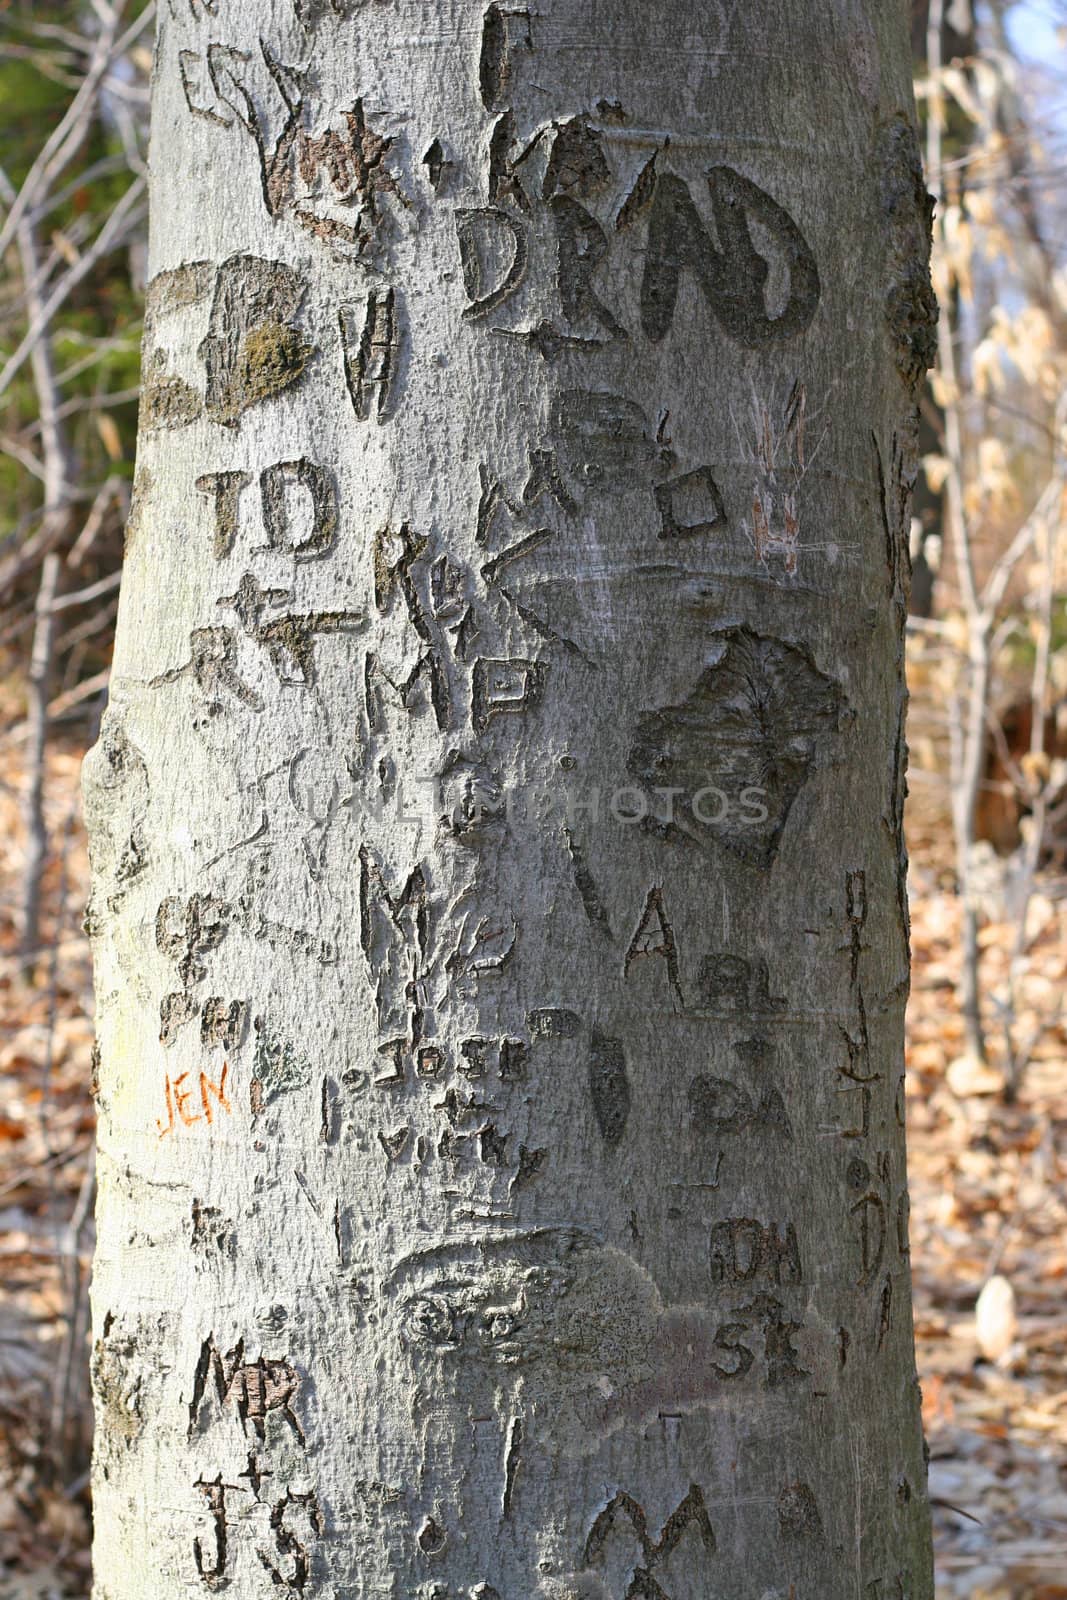 A closeup texture of a tree trunk with a whole bunch of names and initials carved into it.